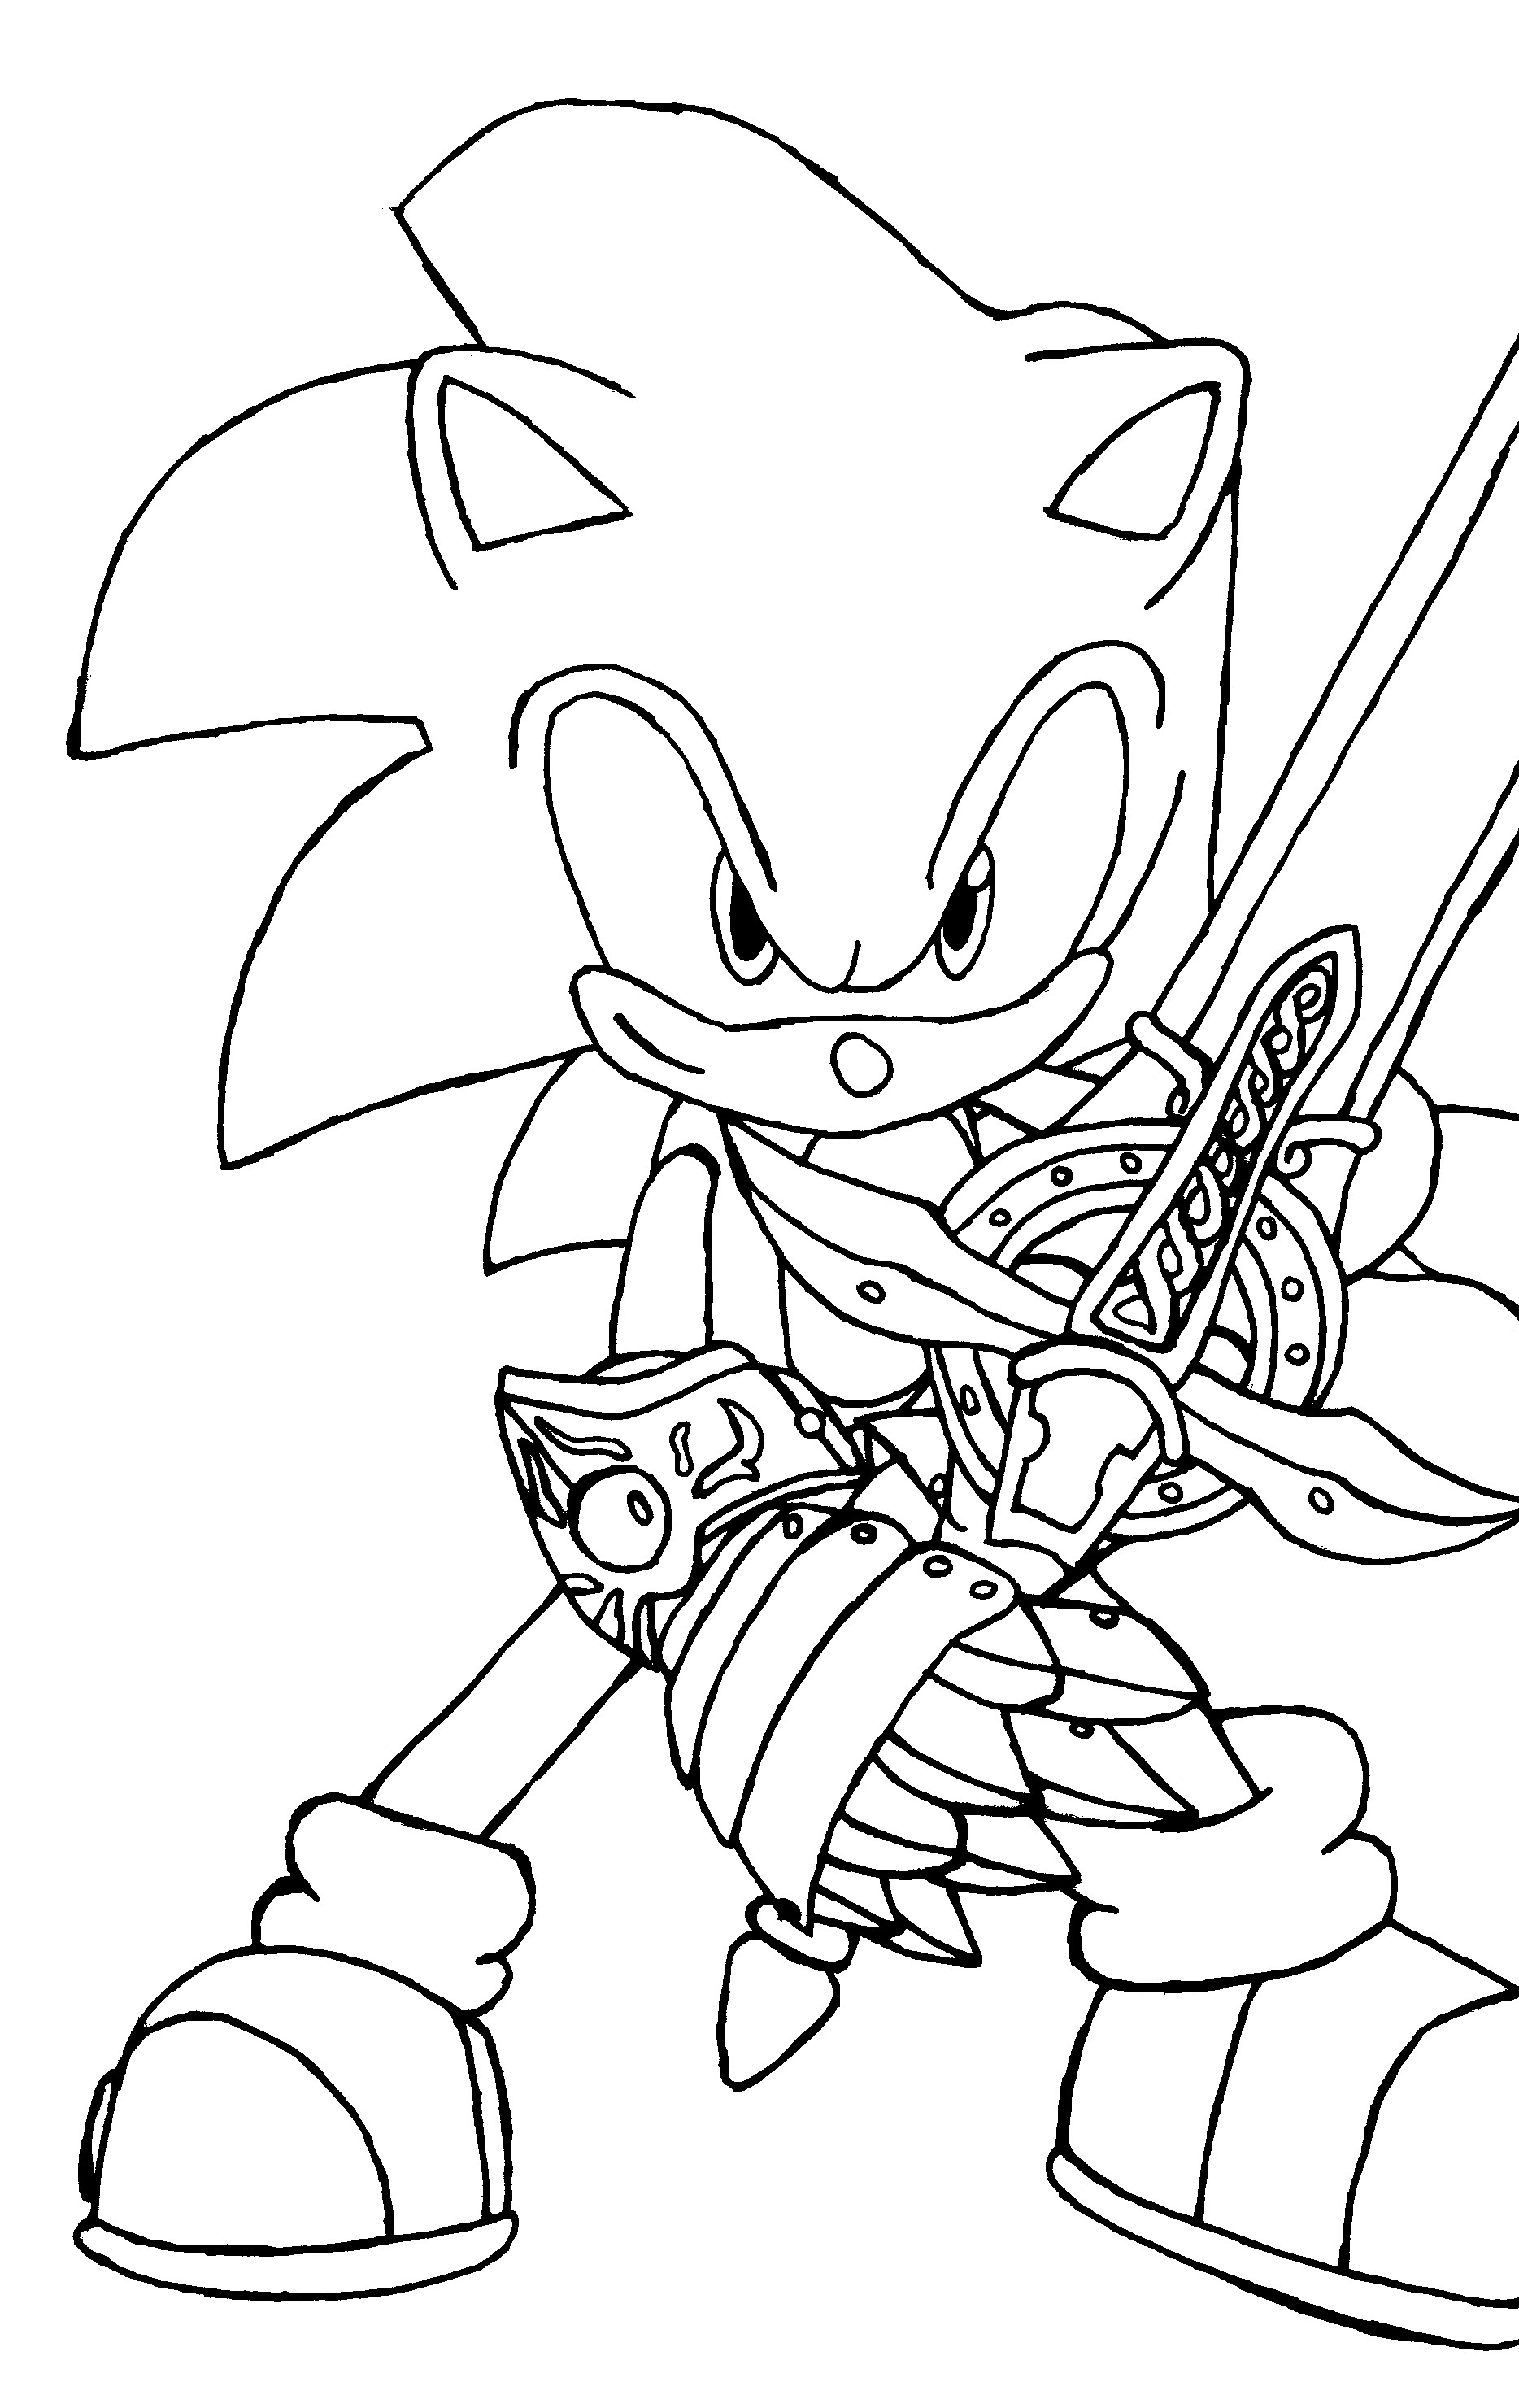 colouring pages free online games free printable sonic the hedgehog coloring pages for kids games online pages colouring free 